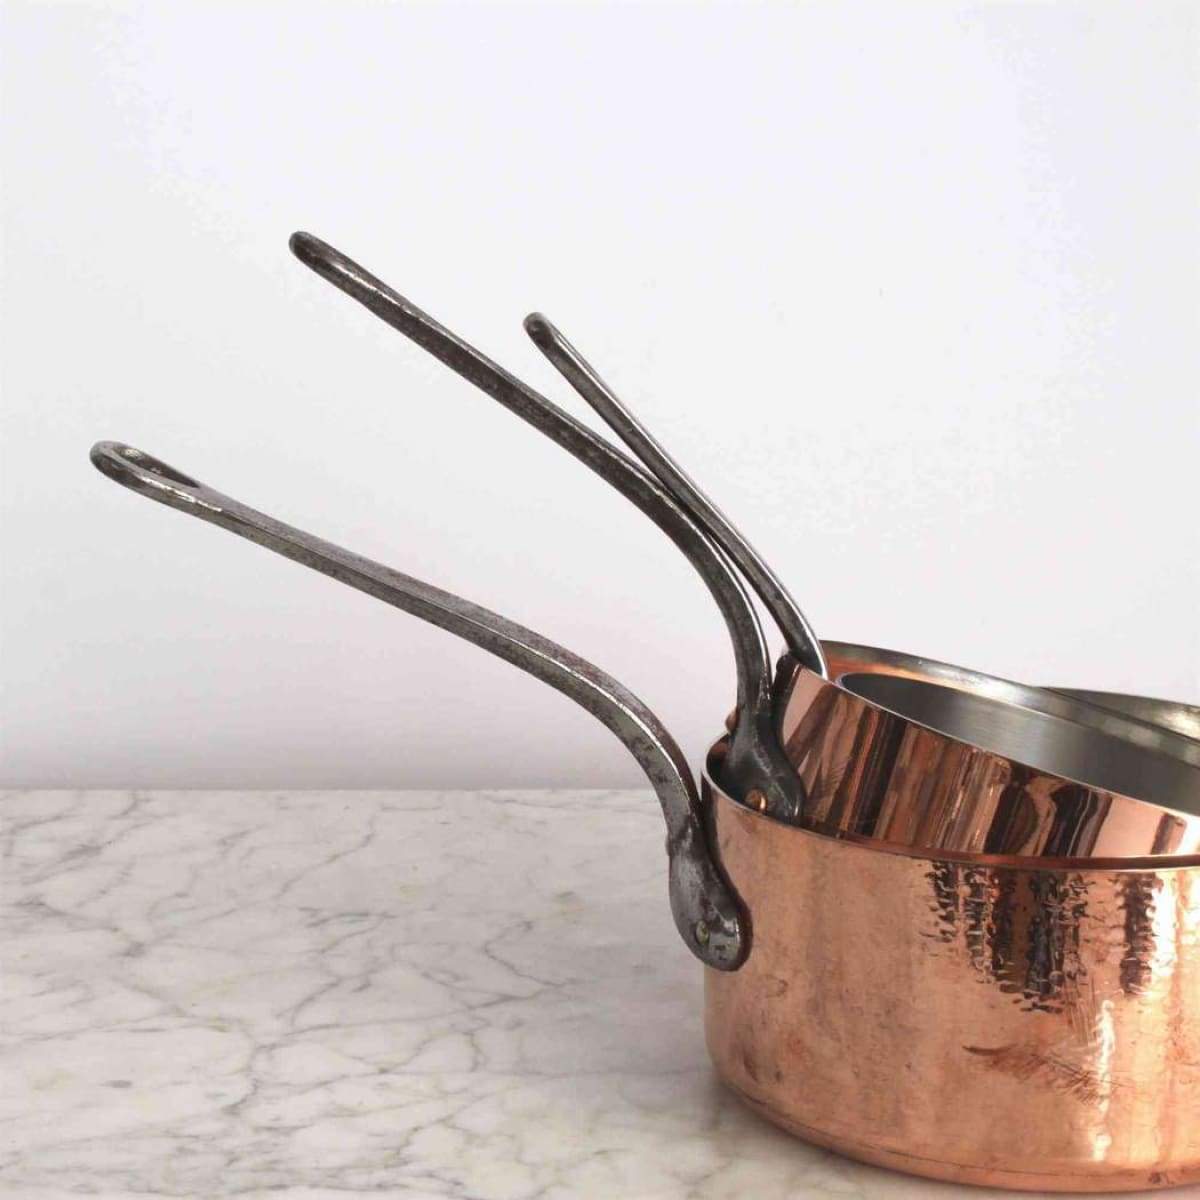 30 lb LFD&H Pot, BD-Co Lid. 2mm Stockpot RETINNED and ready to use in your  kitchen! 17 Diameter, 13 Tall. Vintage copper pots and pans.